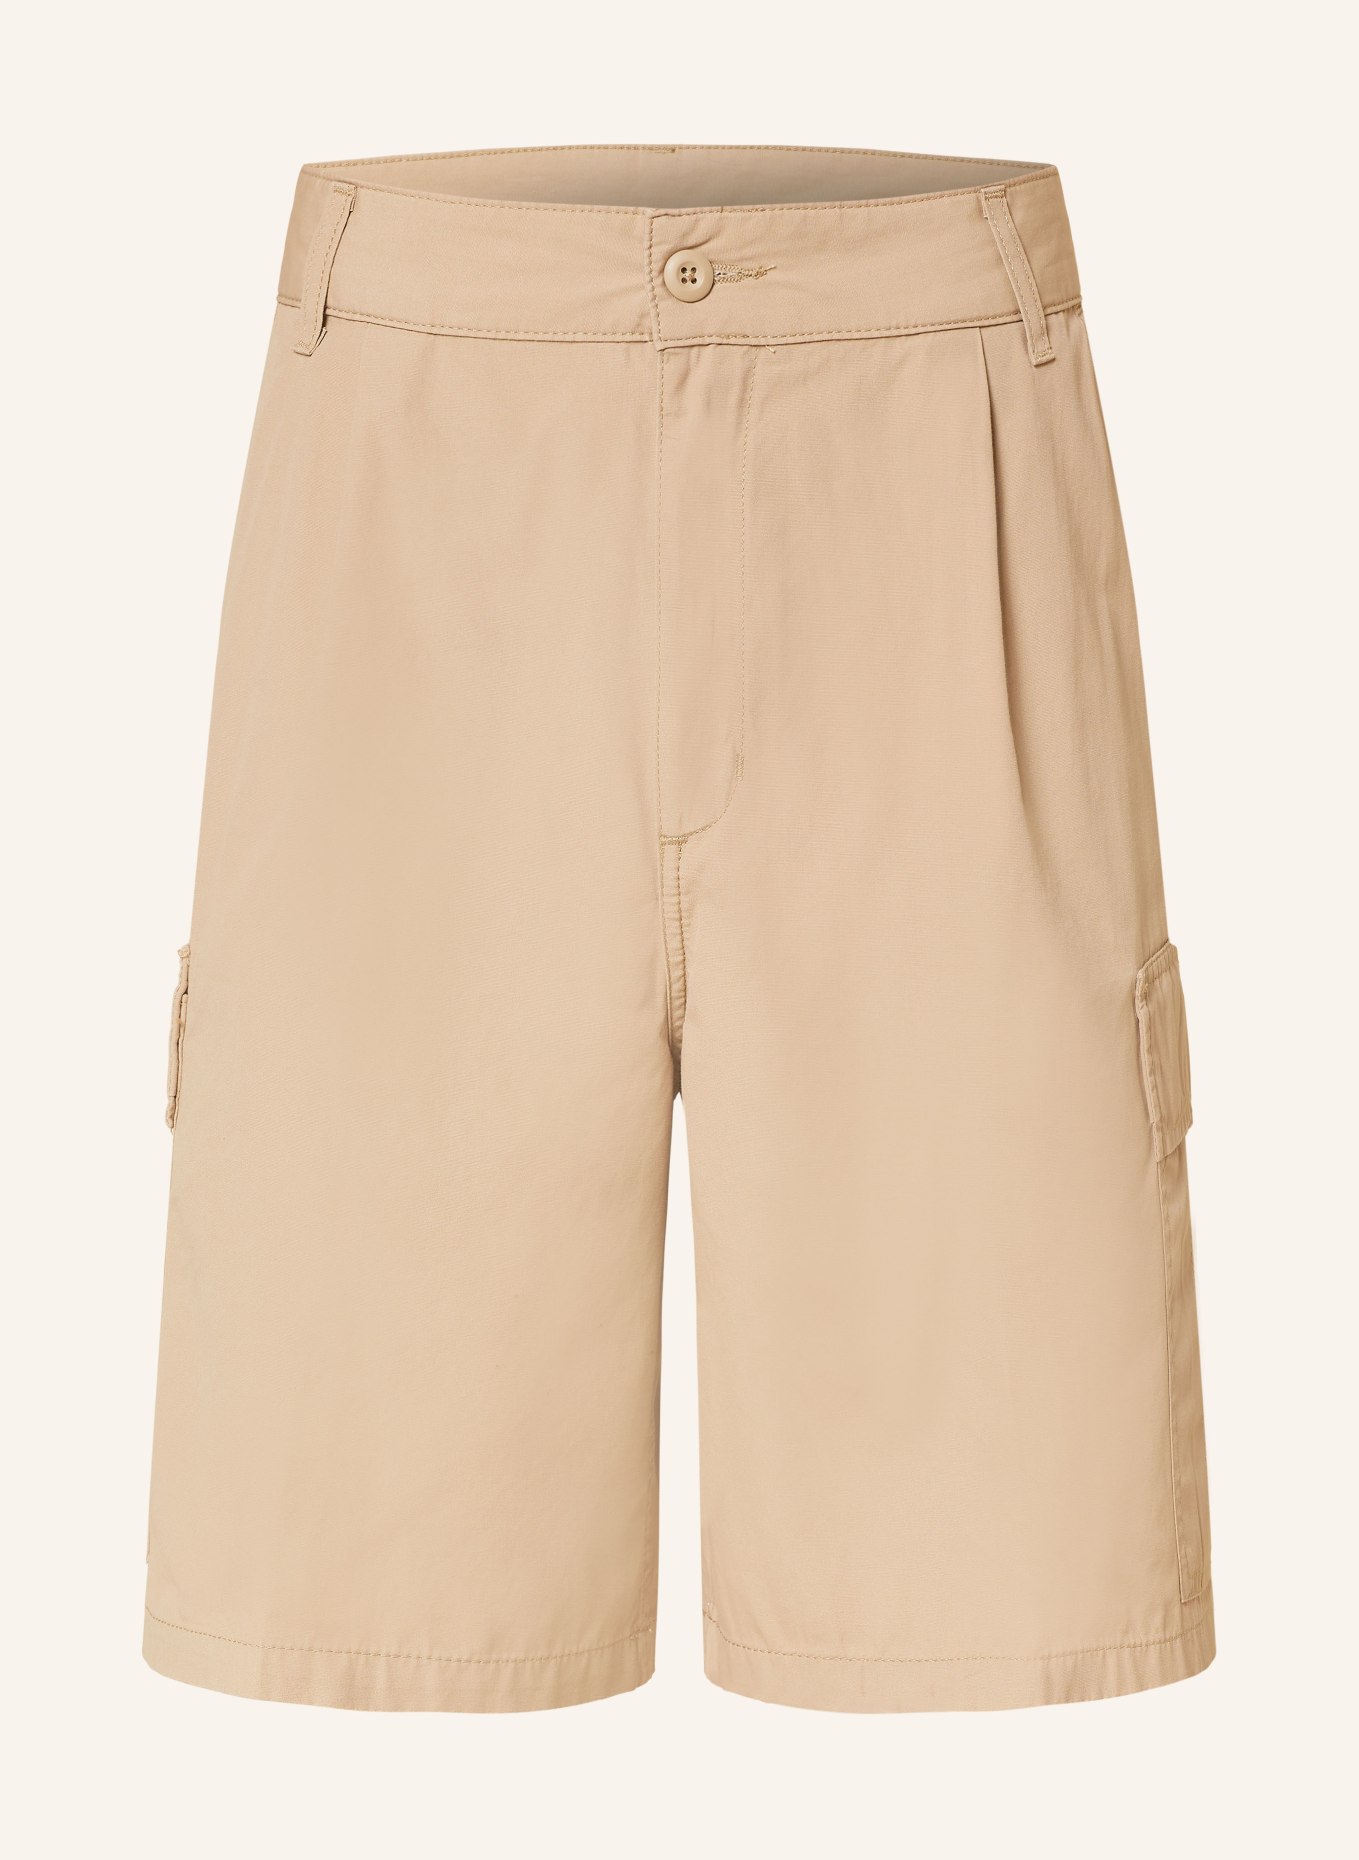 carhartt WIP Cargoshorts COLE Relaxed Fit, Farbe: CAMEL (Bild 1)